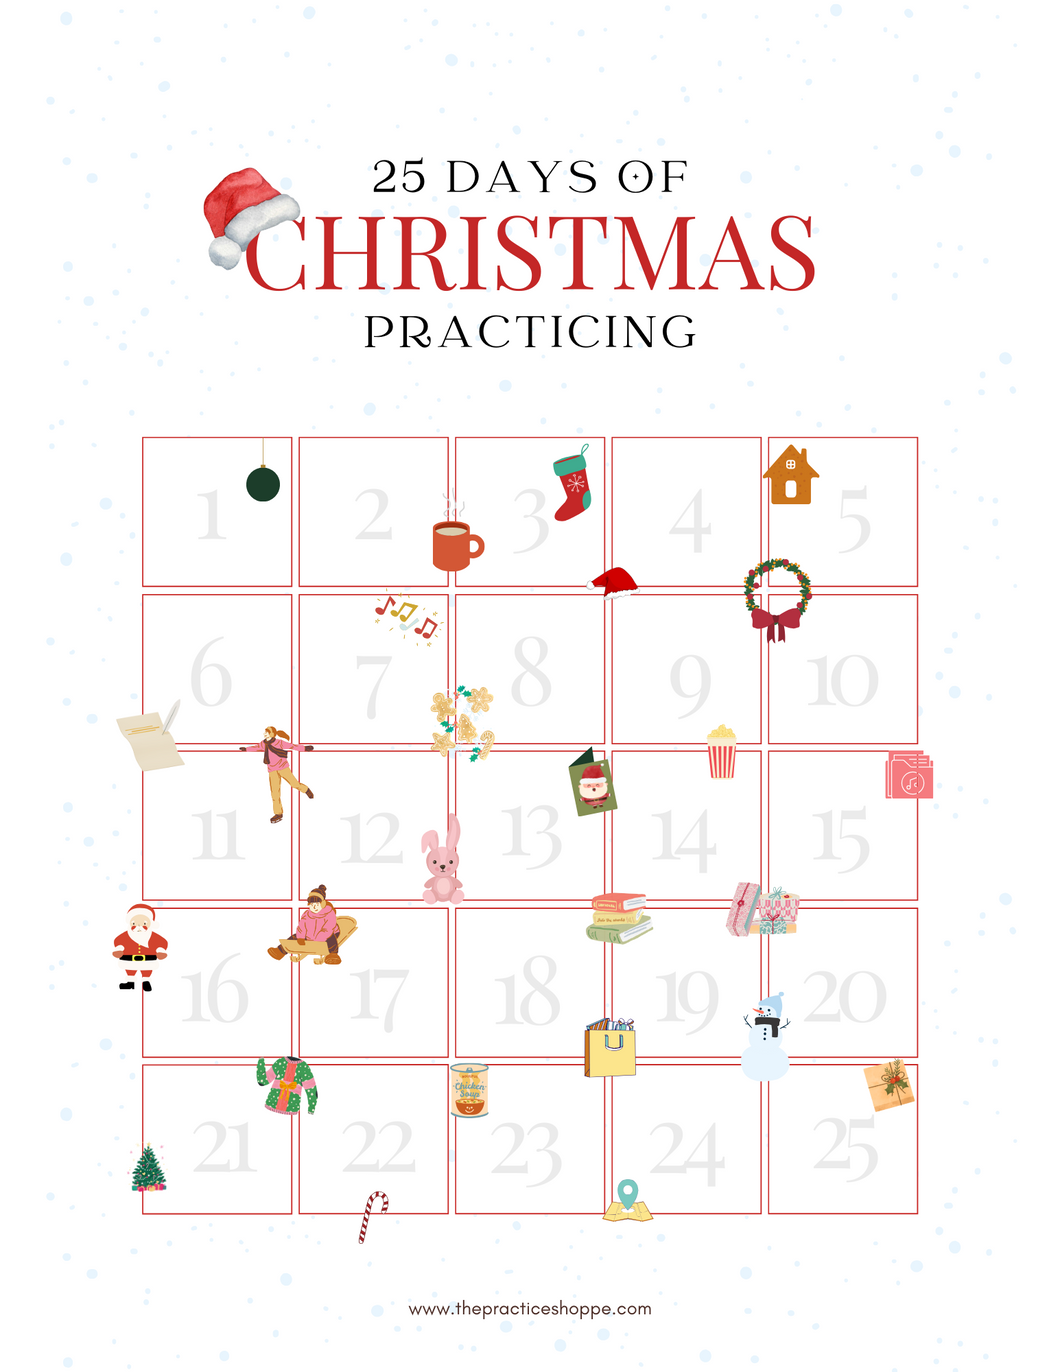 25 Days of Christmas Practicing (Digital Download)